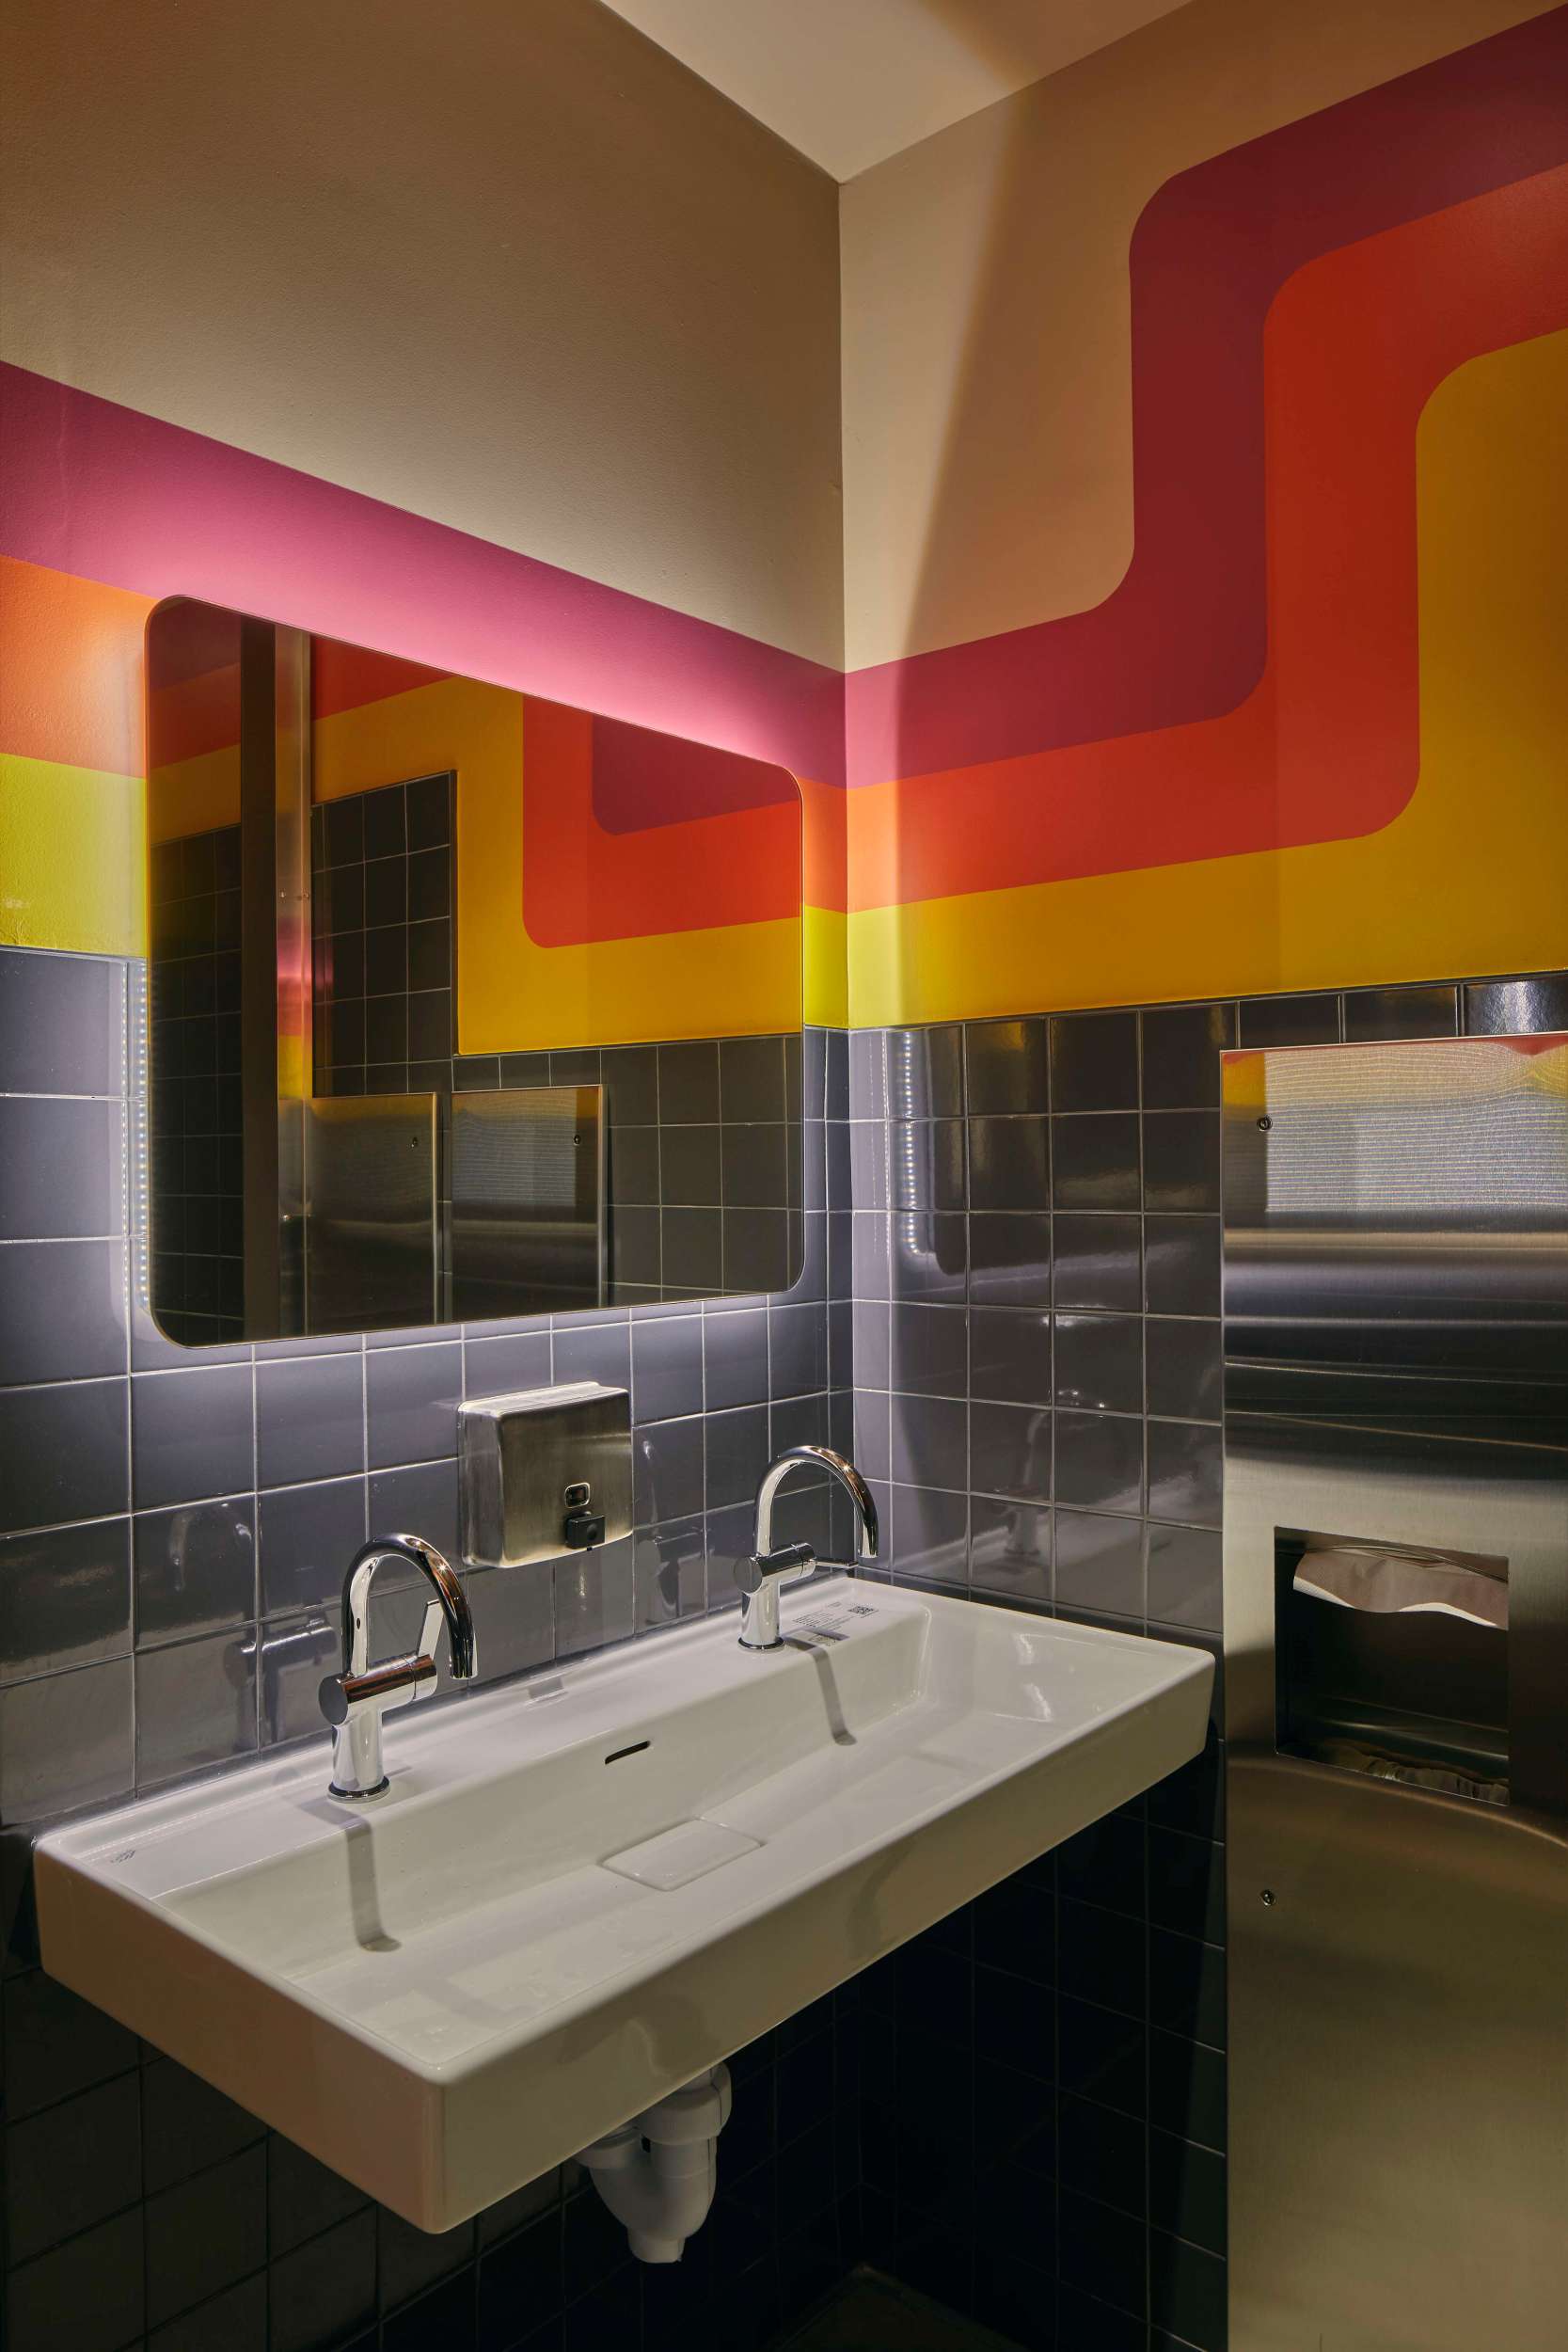 multi-colored bathroom including yellow, orange, and red stripes, with a sink and mirror pictured